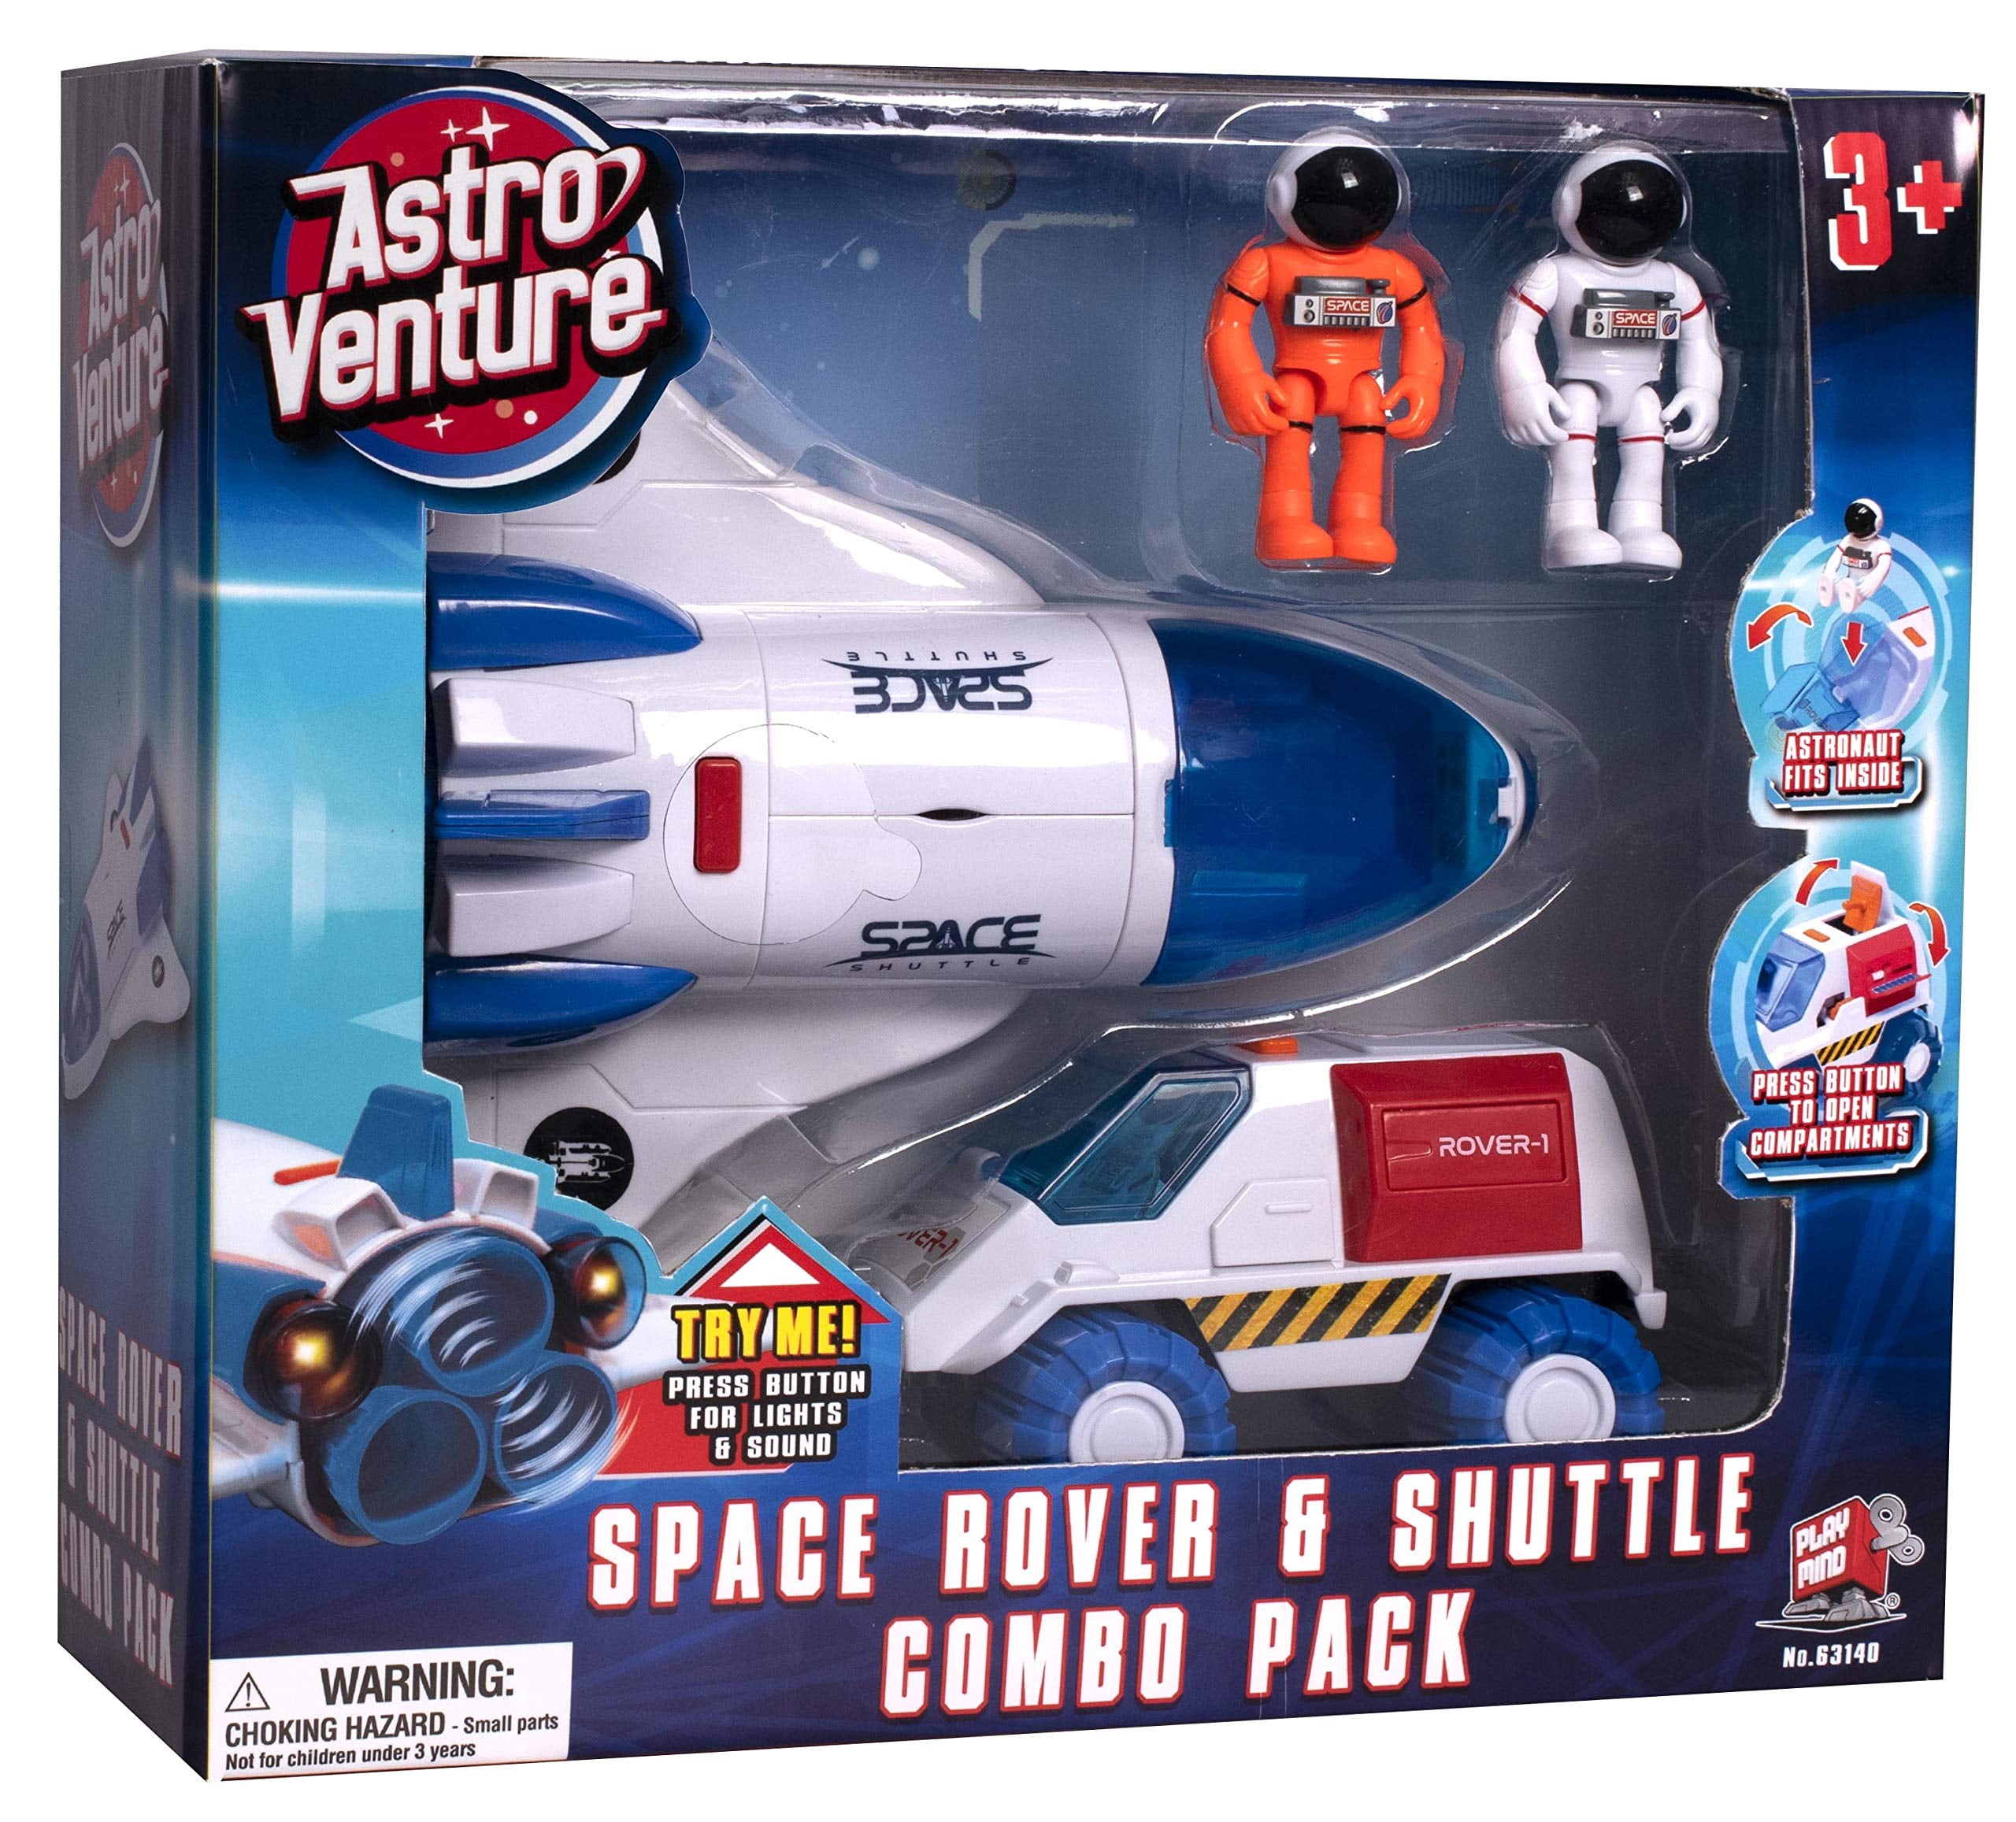 Astro Venture Space Shuttle Toy with 2 Astronauts, Mechanical Arm